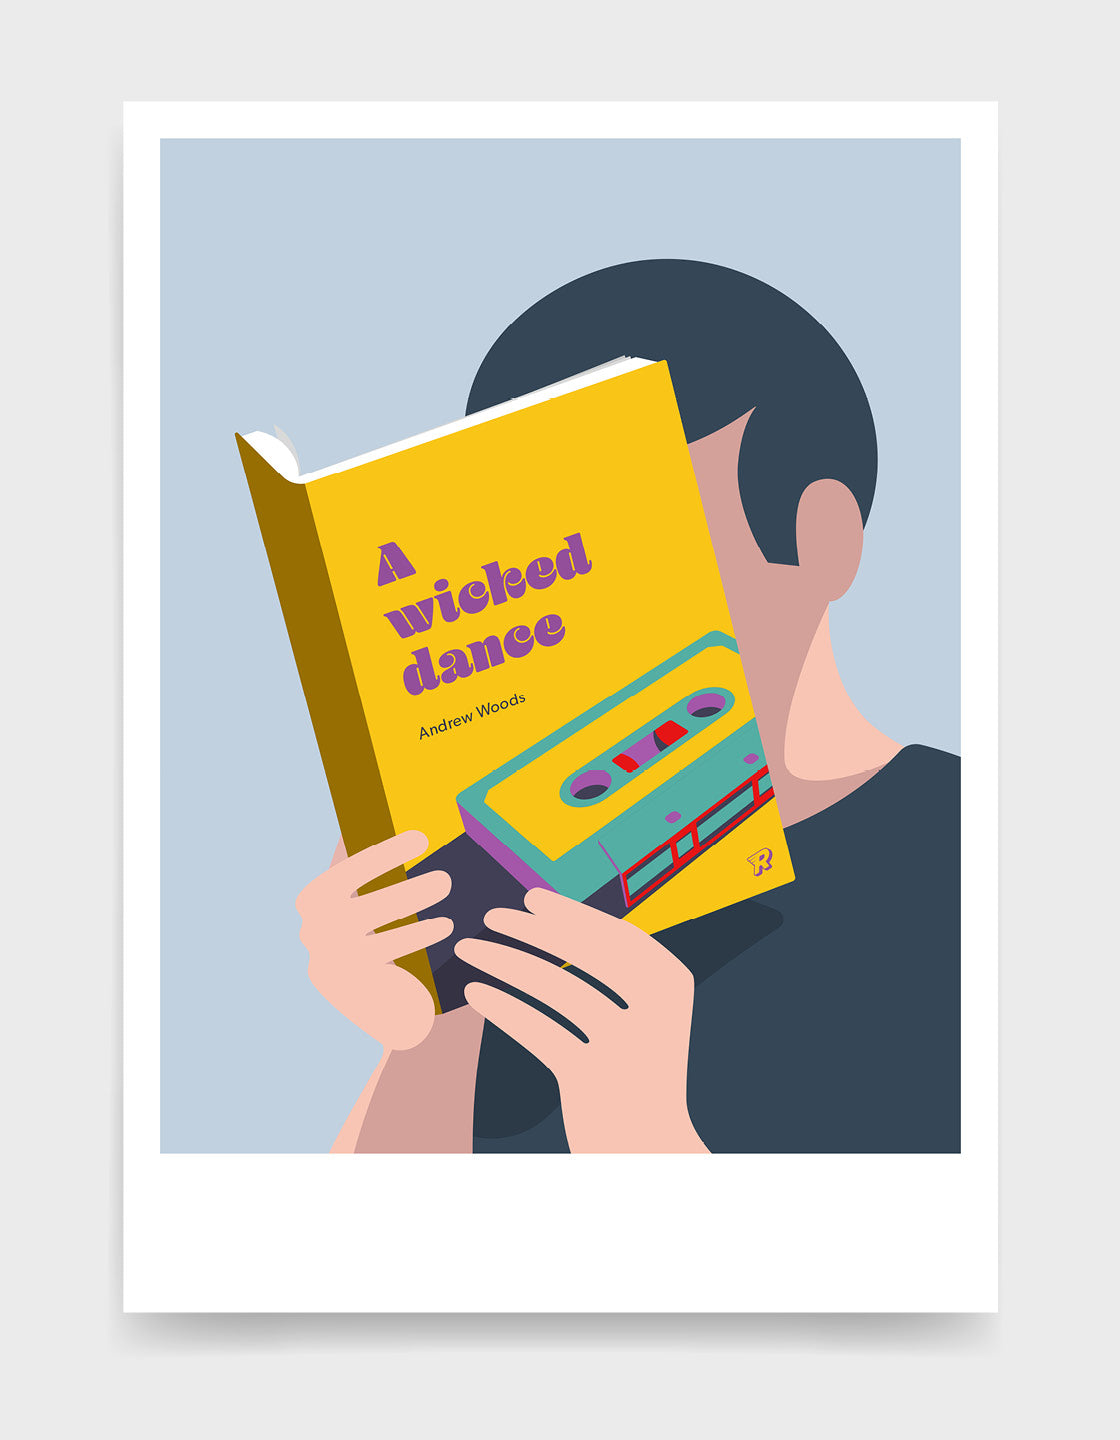 Minimal art print depicting a white person with their head in a book, reading. The book cover can be Personalised, this one has a mixtape design